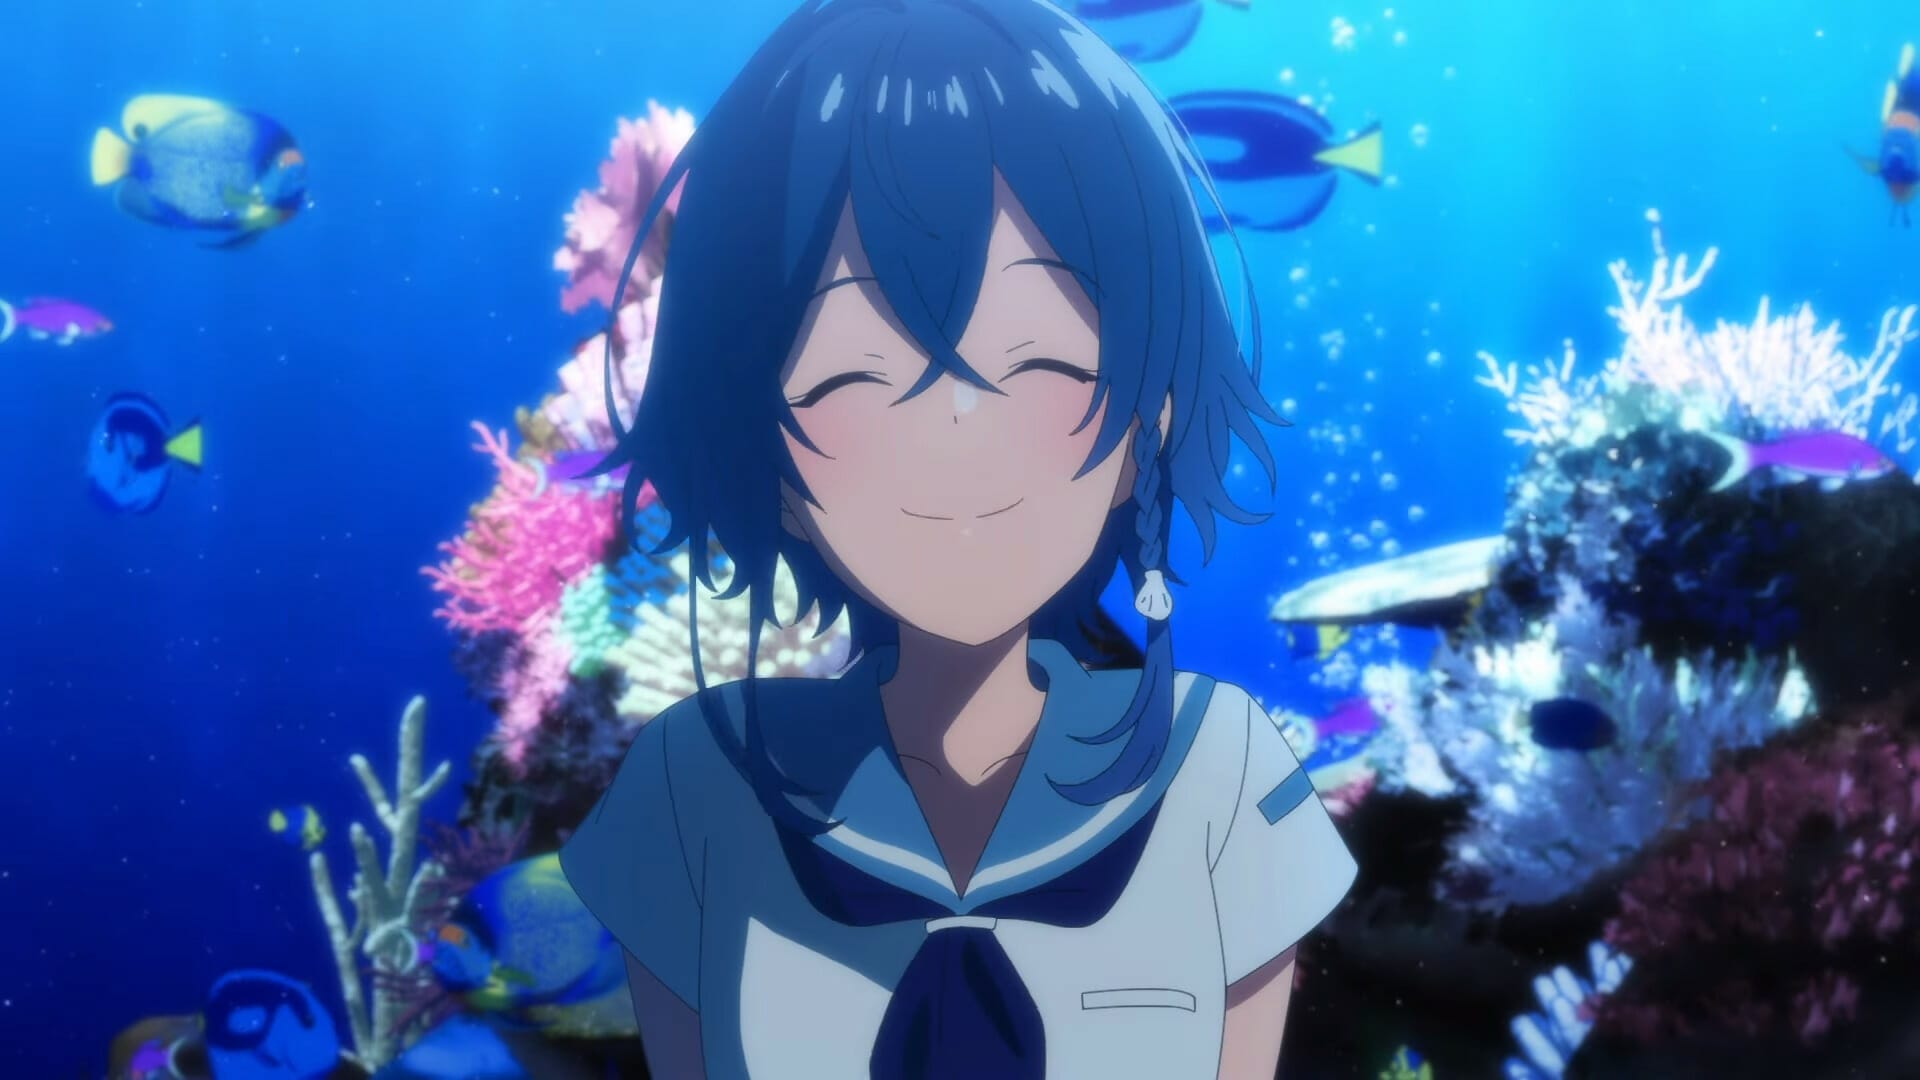 A blue-haired girl in a school uniform smiles as she stands in front of an aquarium.